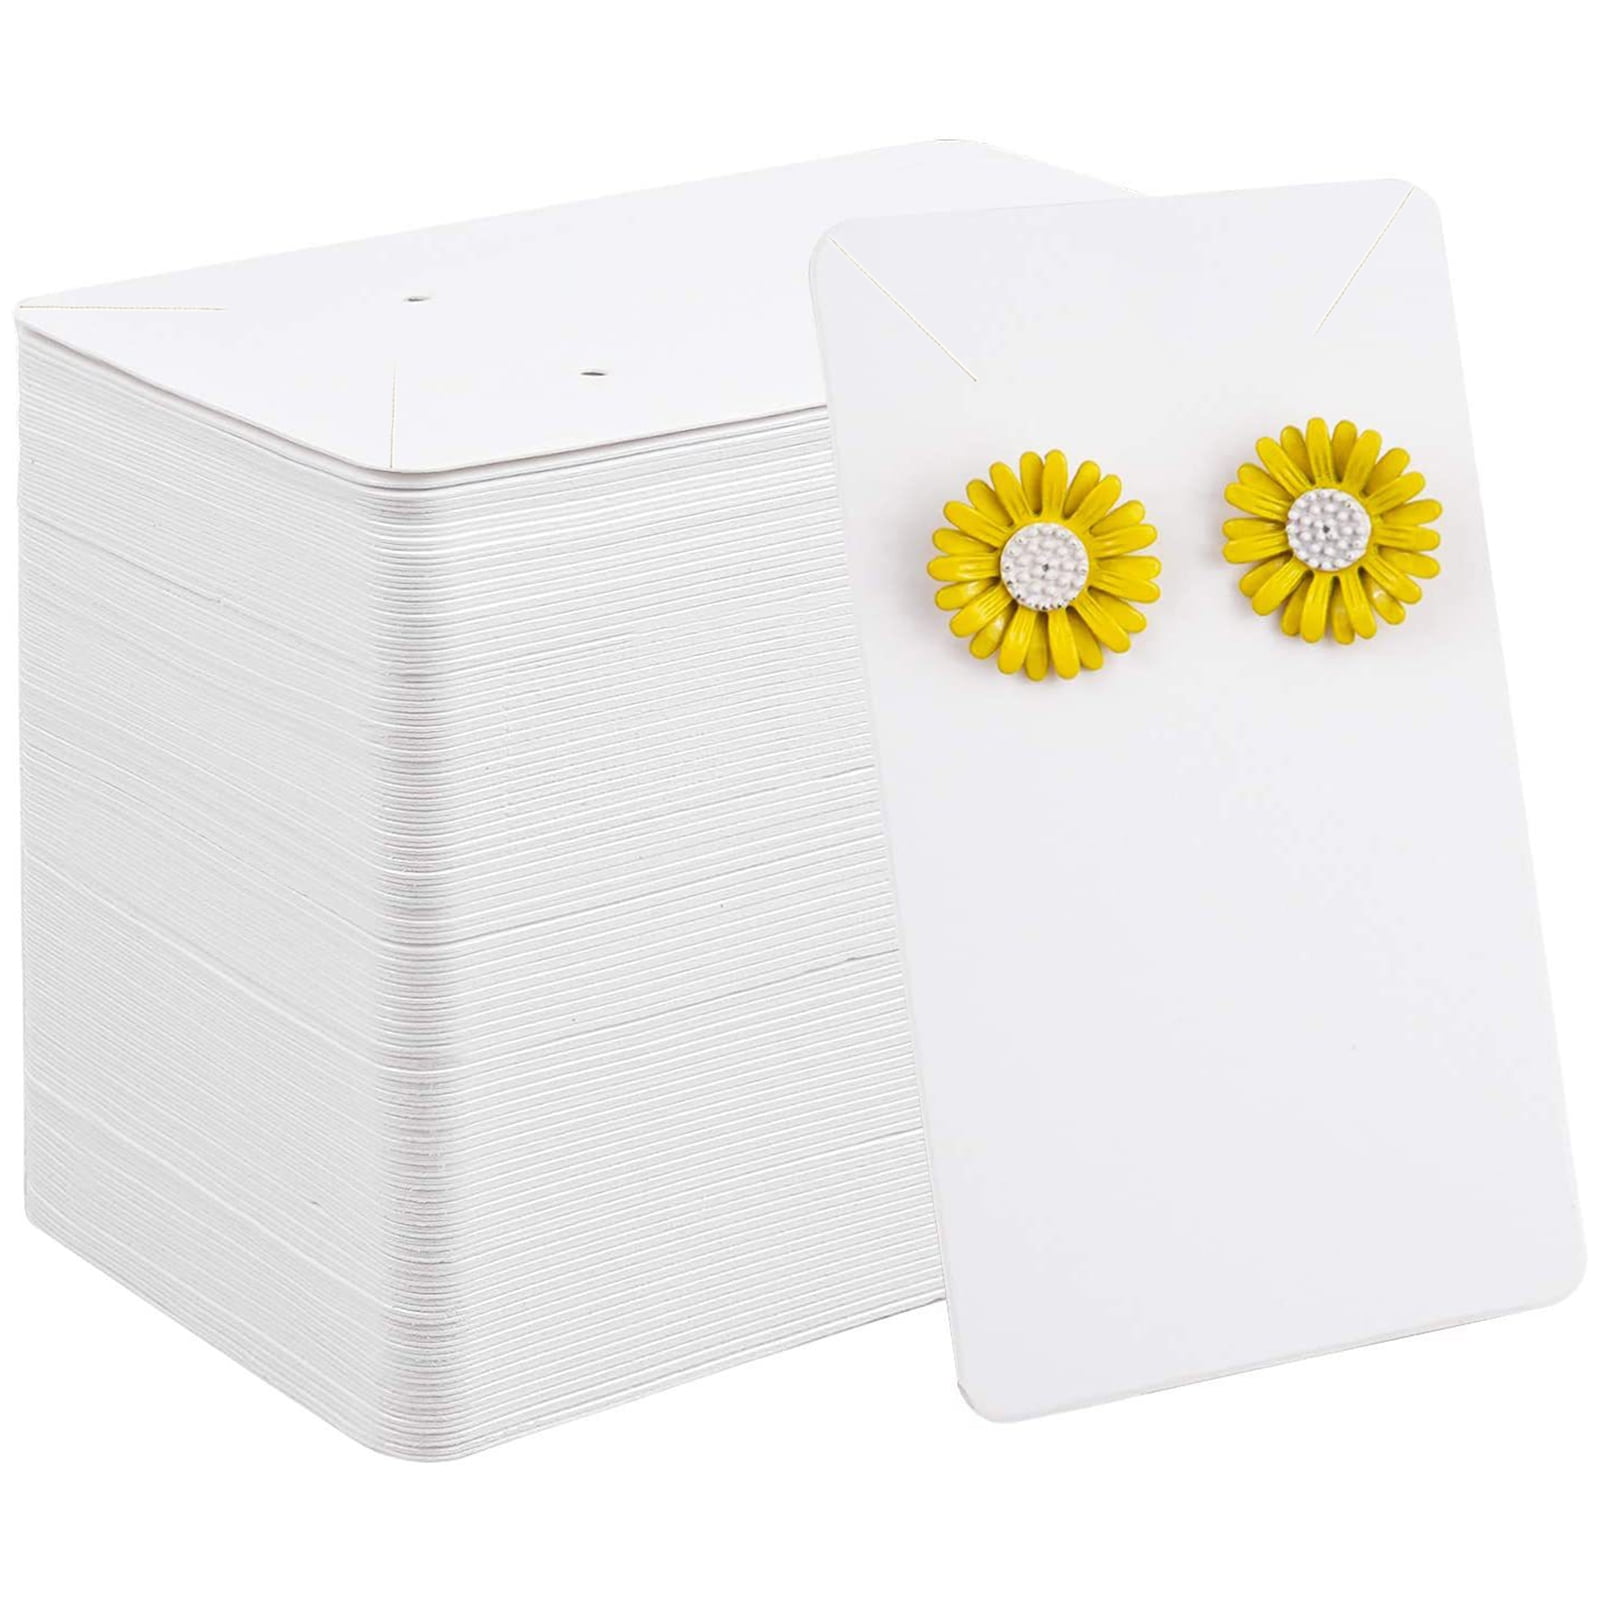  ABOOFAN 500 Pcs Ornament Card Necklace Cards for Selling  Jewelry Small Business Supplies Bracelet Display Cards Necklace Packaging  Cards Dangle Earring Cards White Elevator Pvc Earrings : Office Products